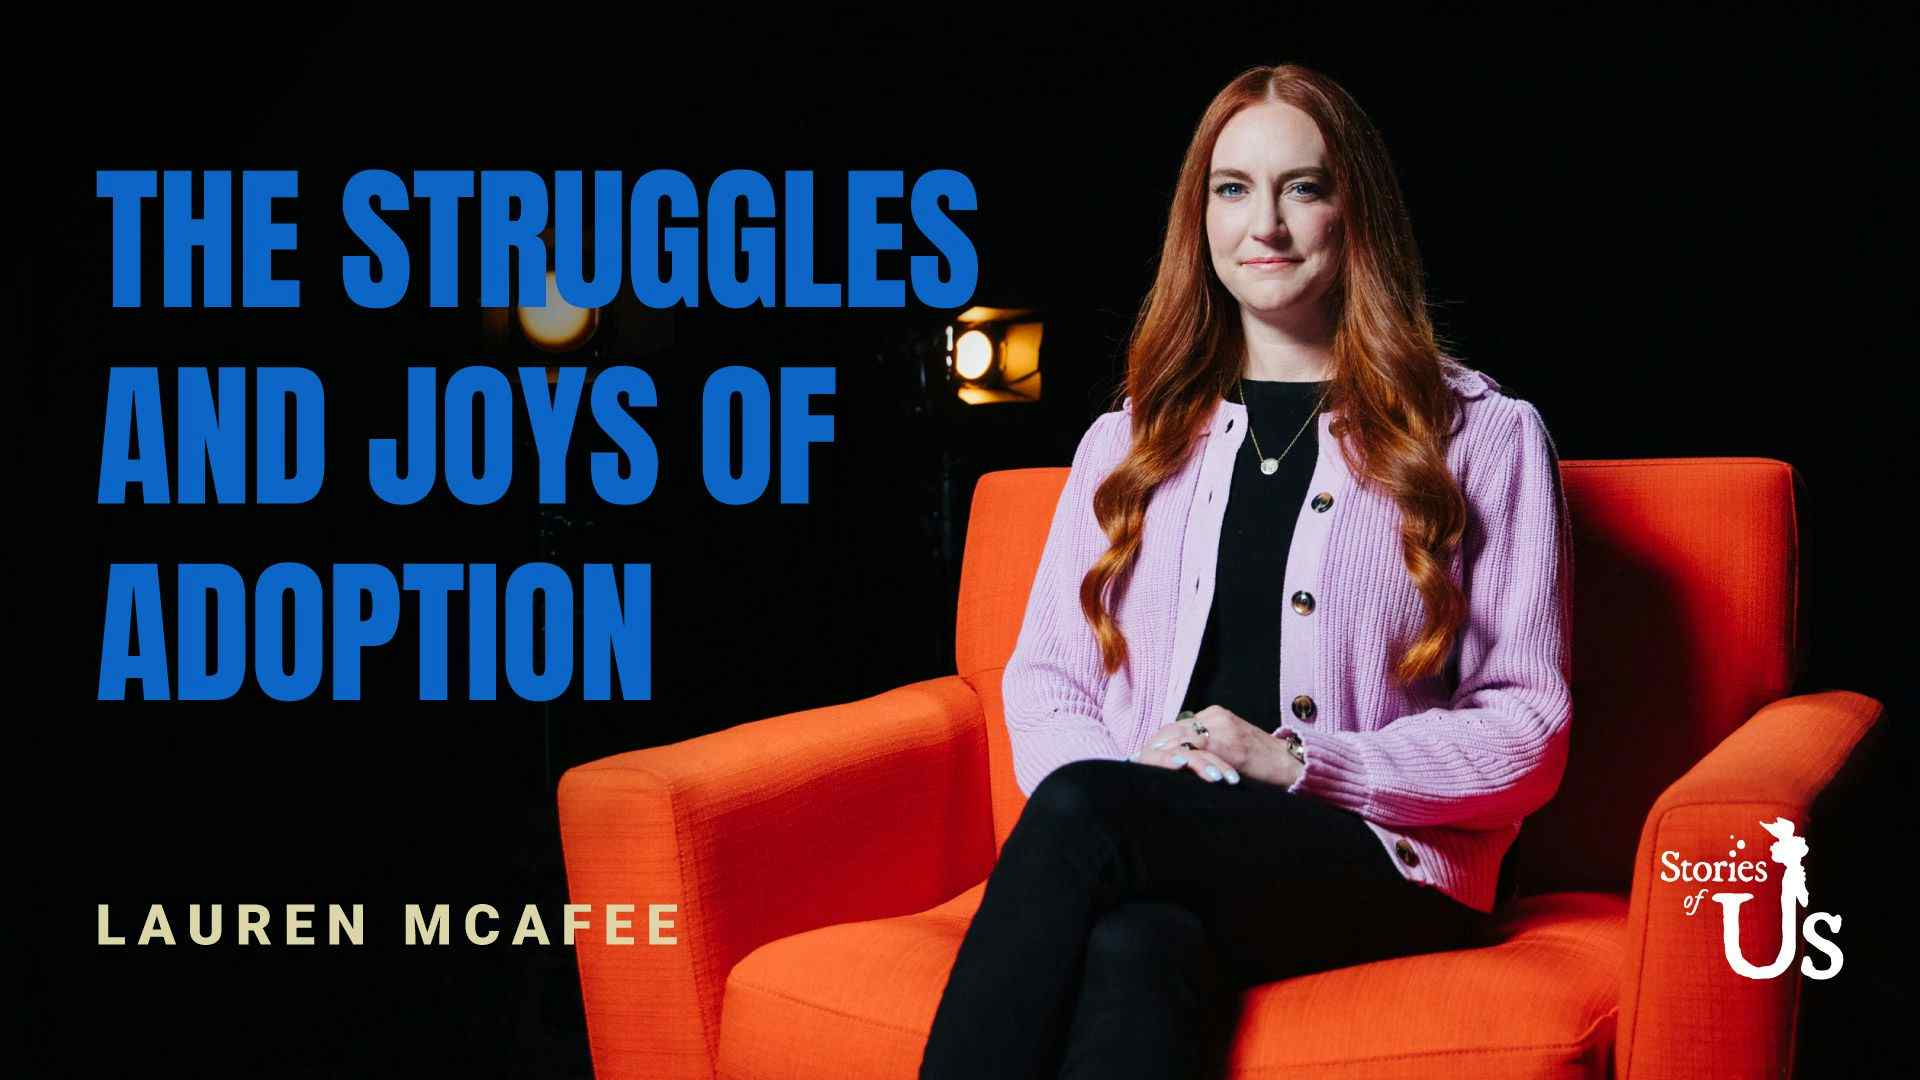 Lauren McAfee: The Struggles and Joys of Adoption